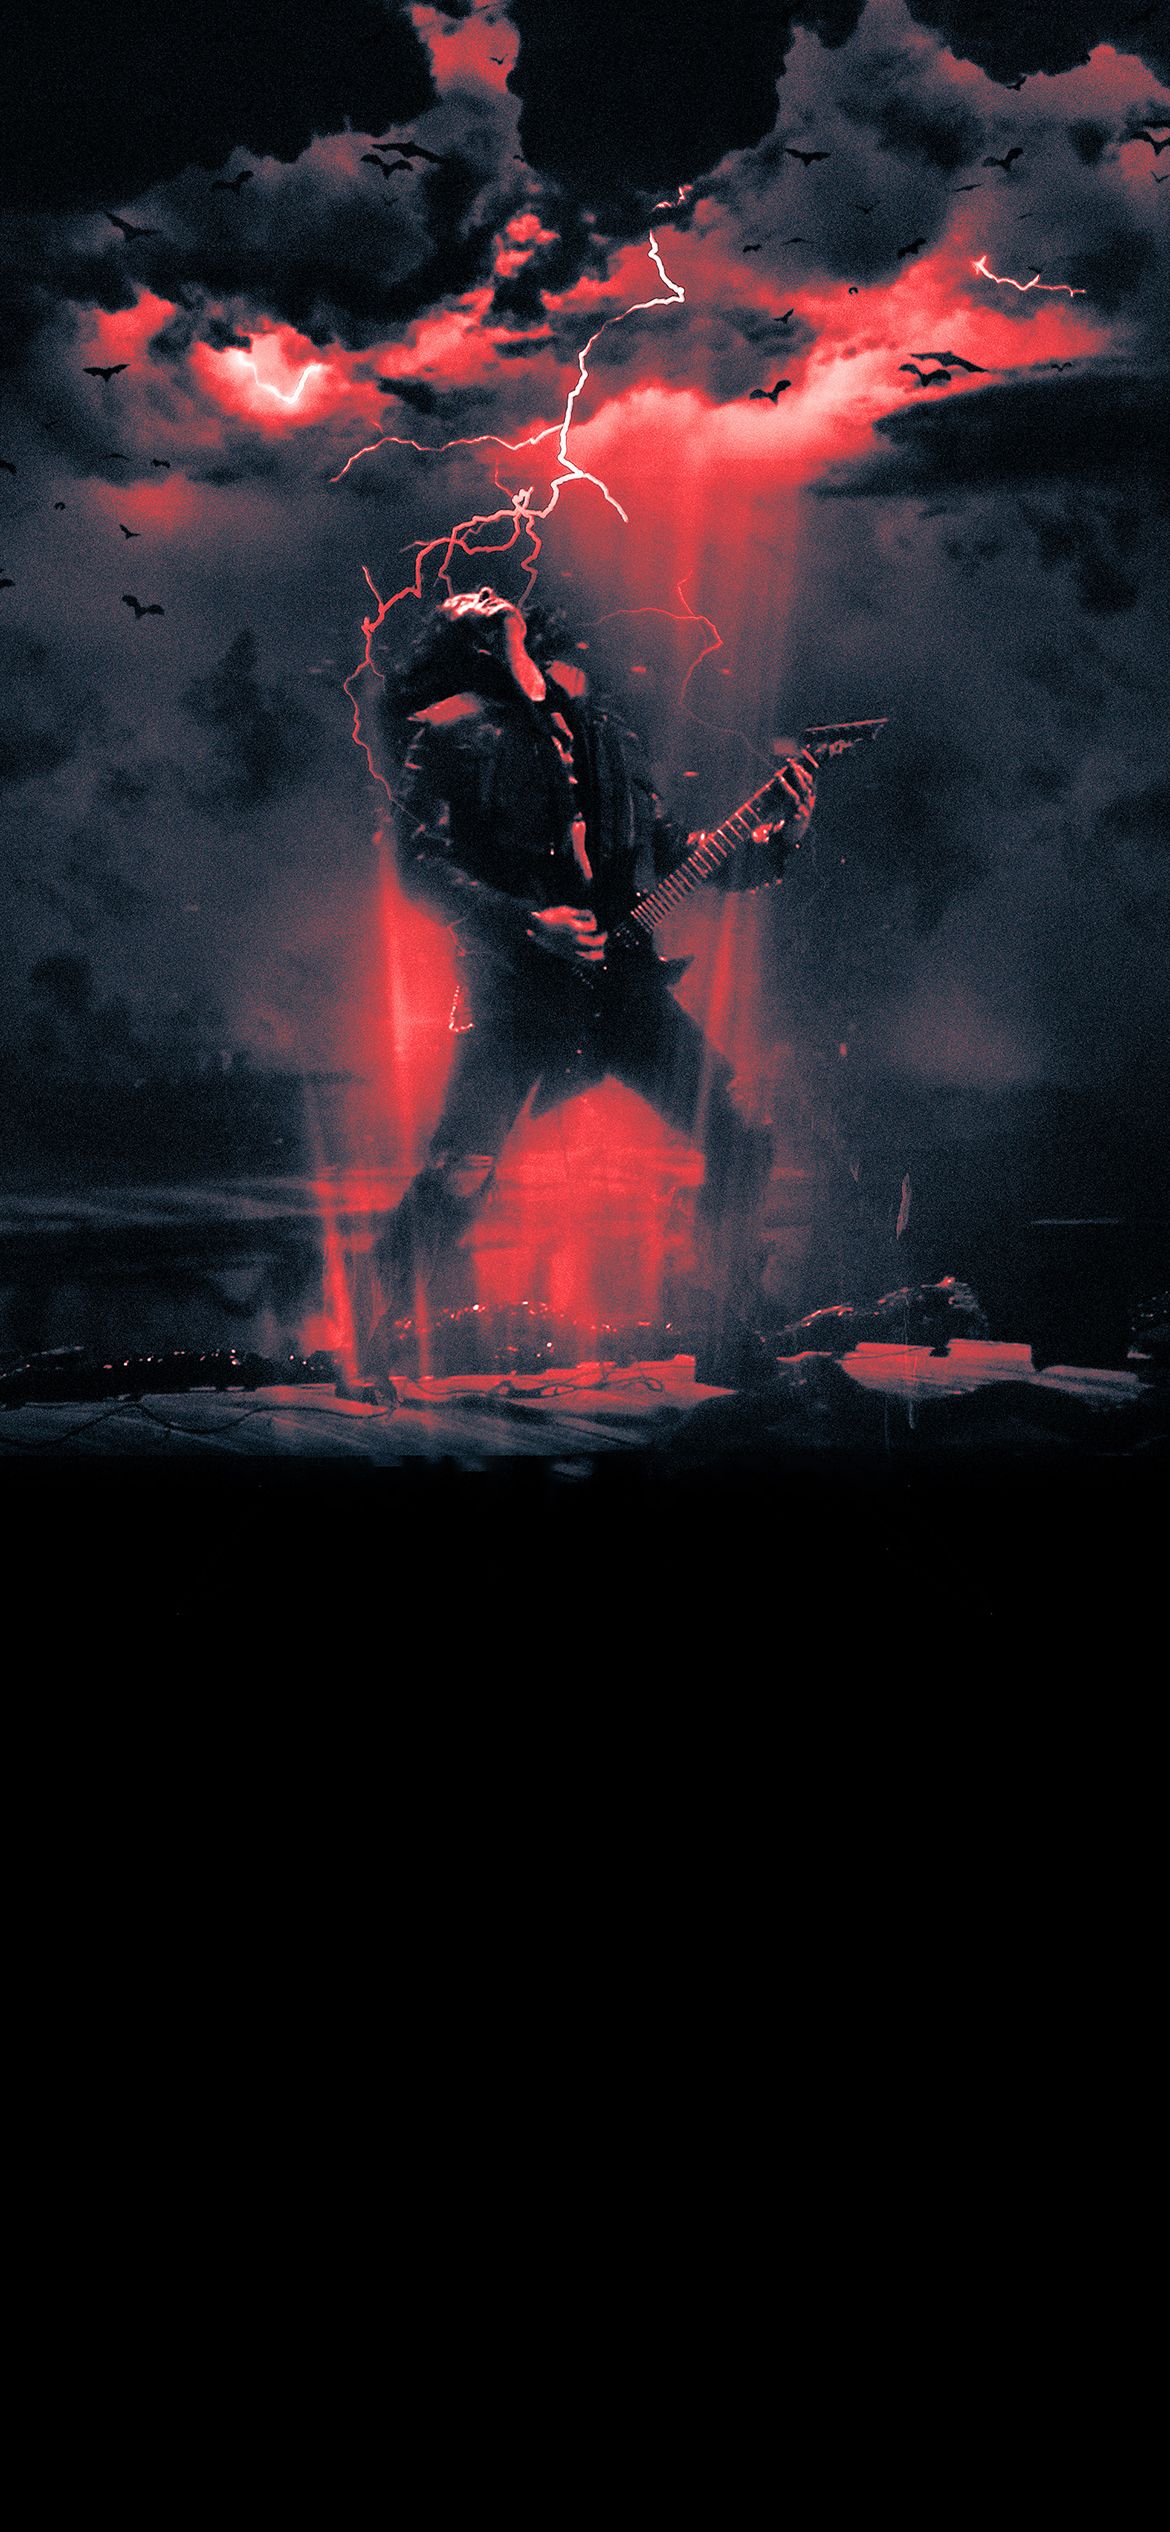 A man playing guitar in the rain with lightning - IPhone red